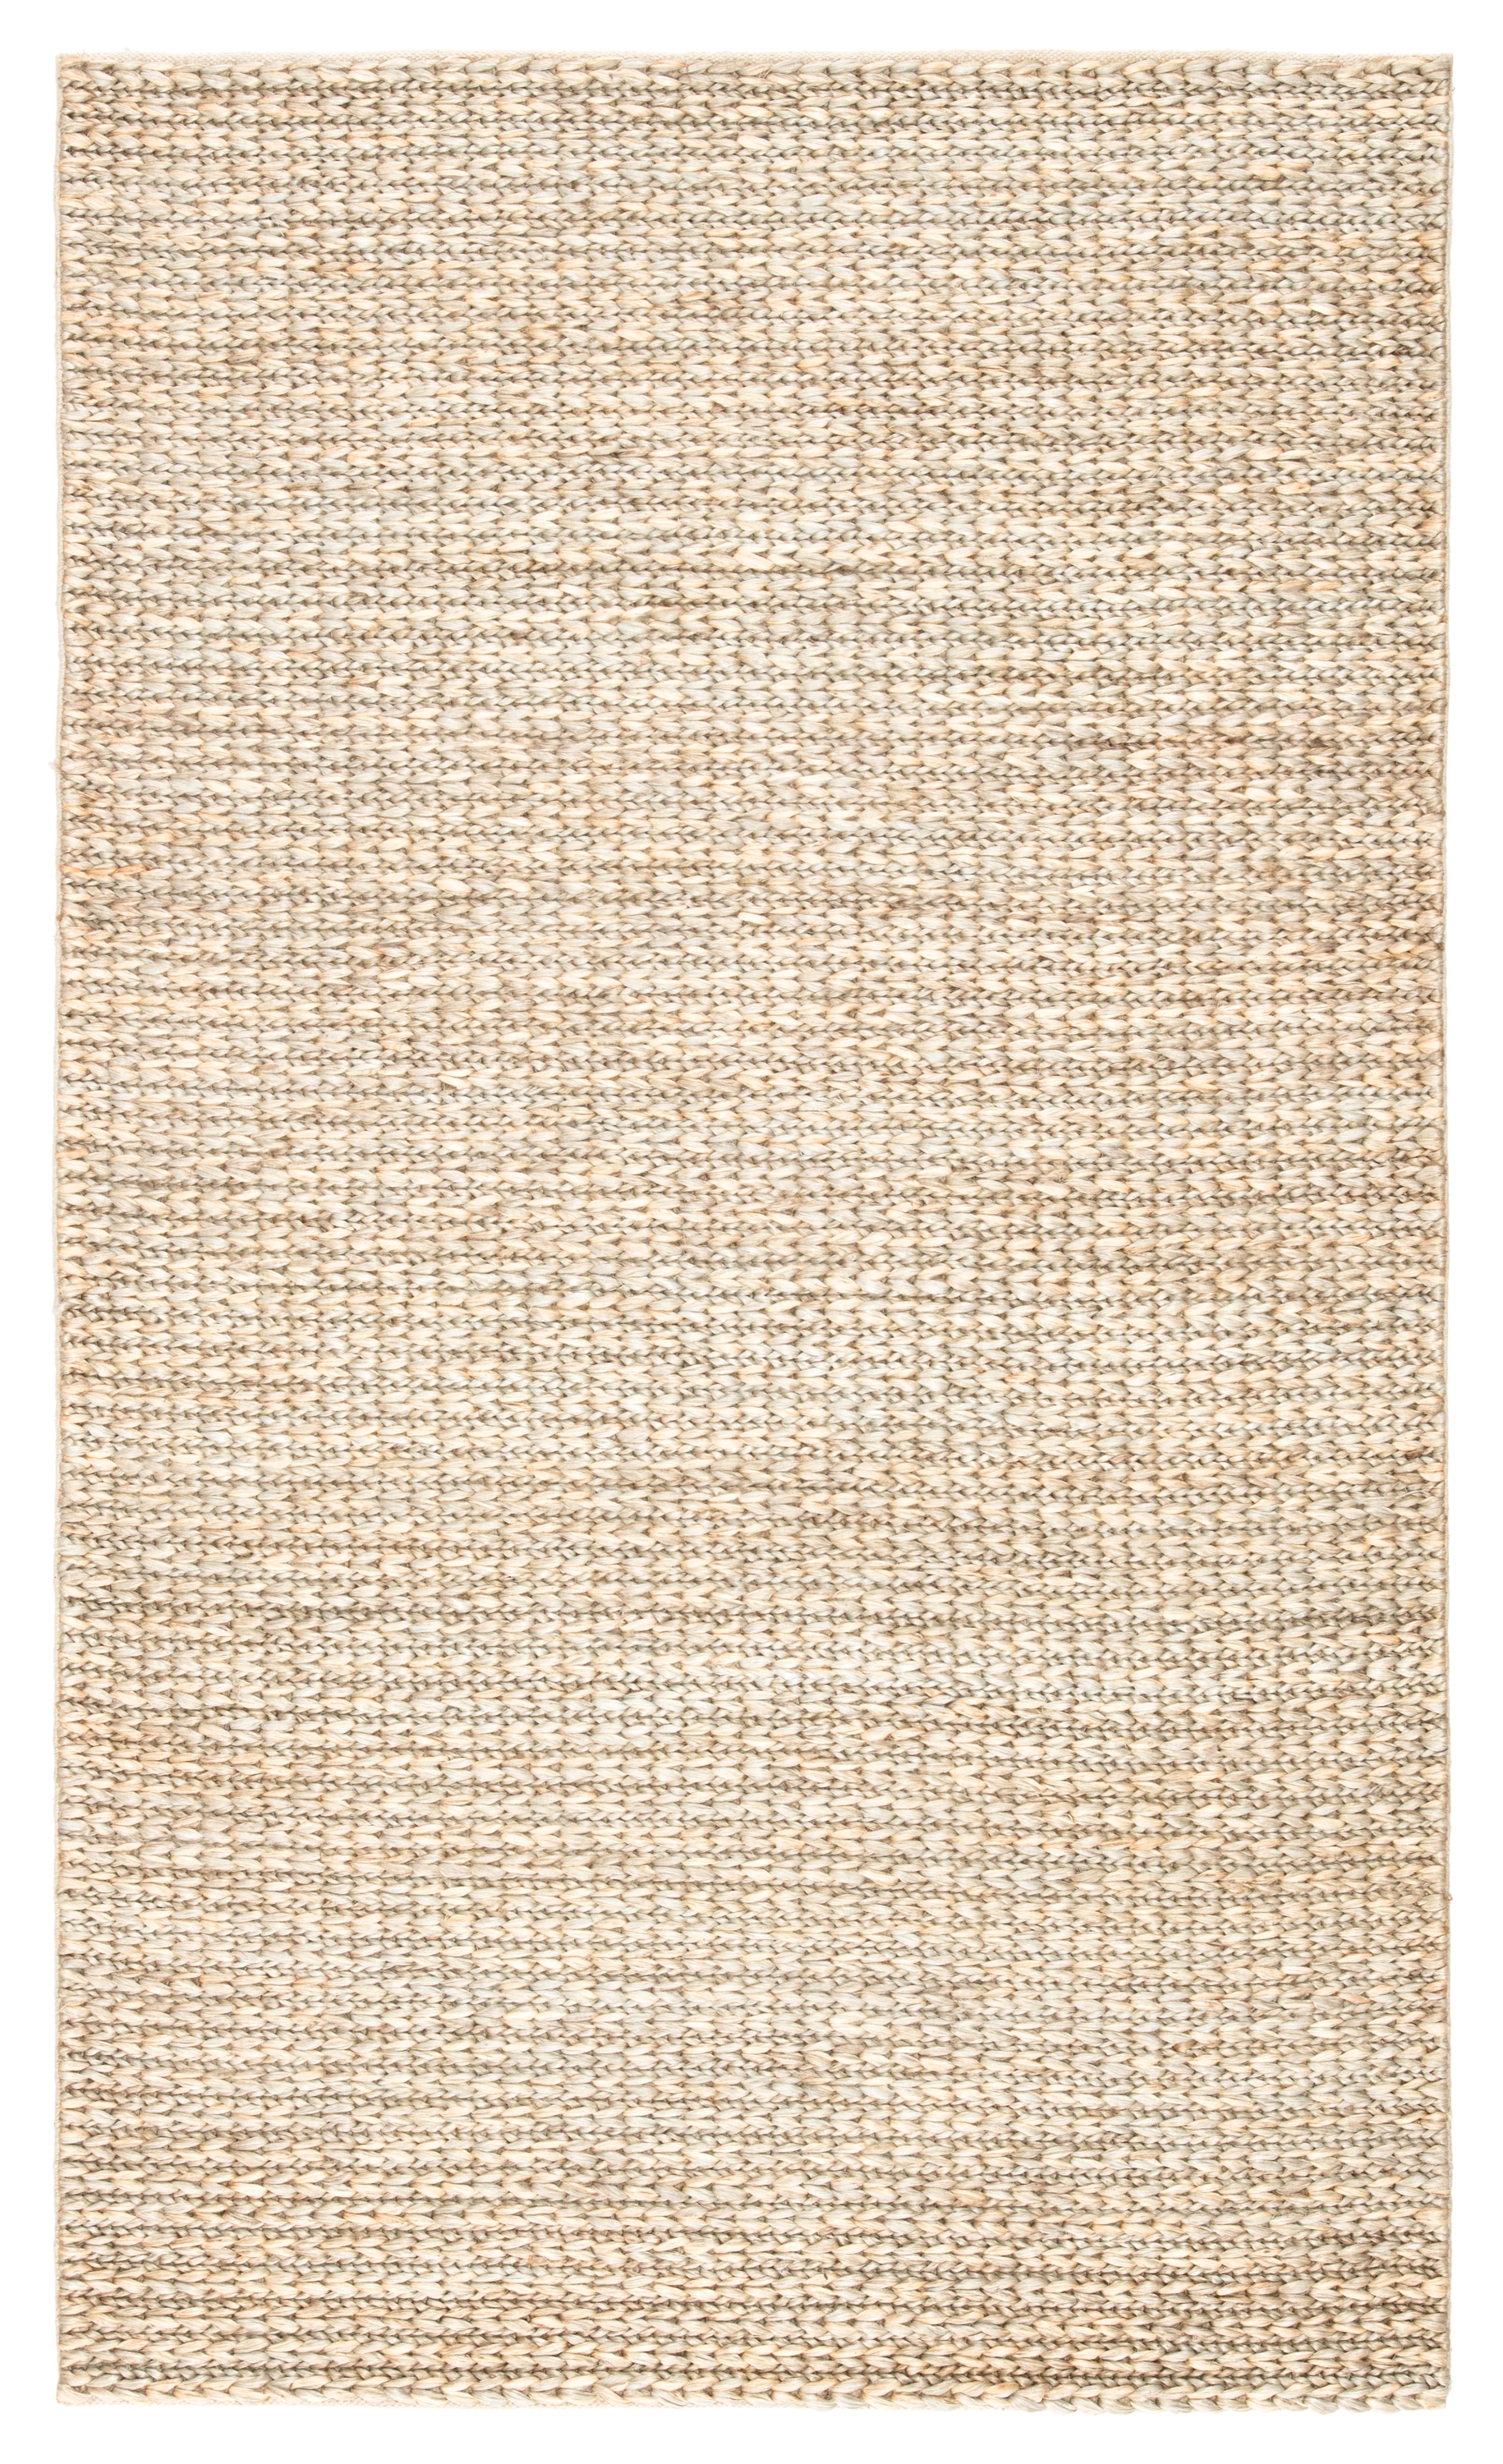 Calista Natural Solid Tan/ Greige Area Rug (9'X12') - Image 0